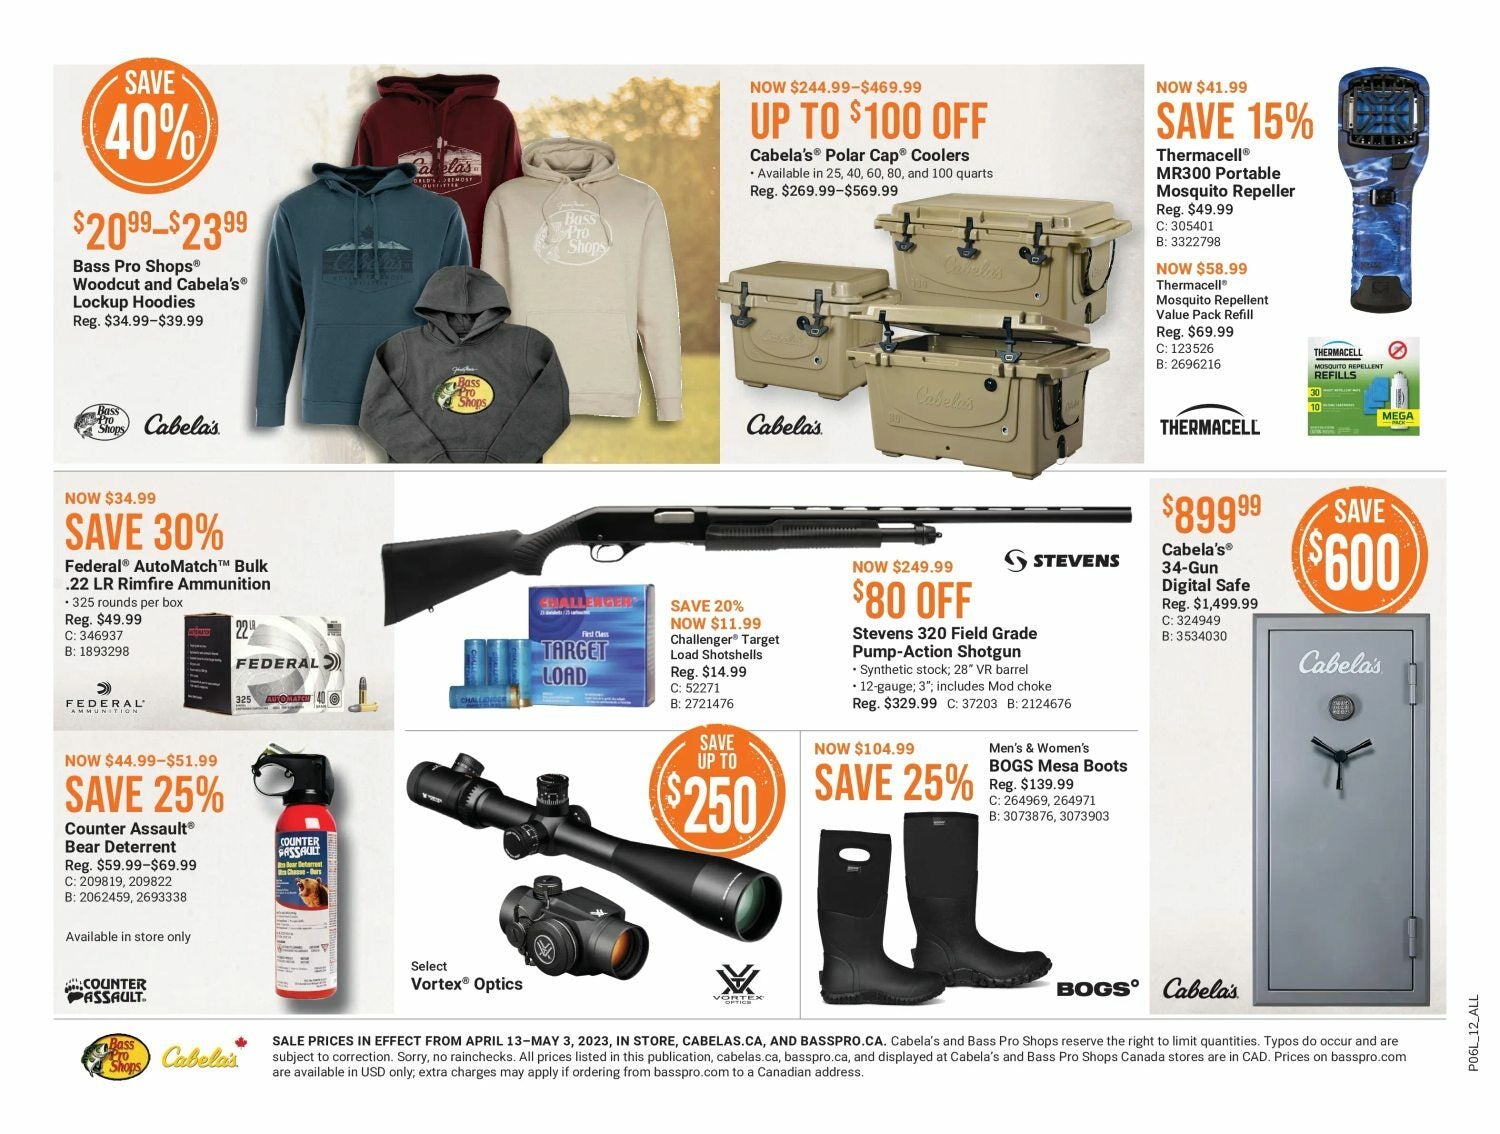 Bass Pro Shops Weekly Flyer - Spring Fishing Classic (ON) - Apr 13